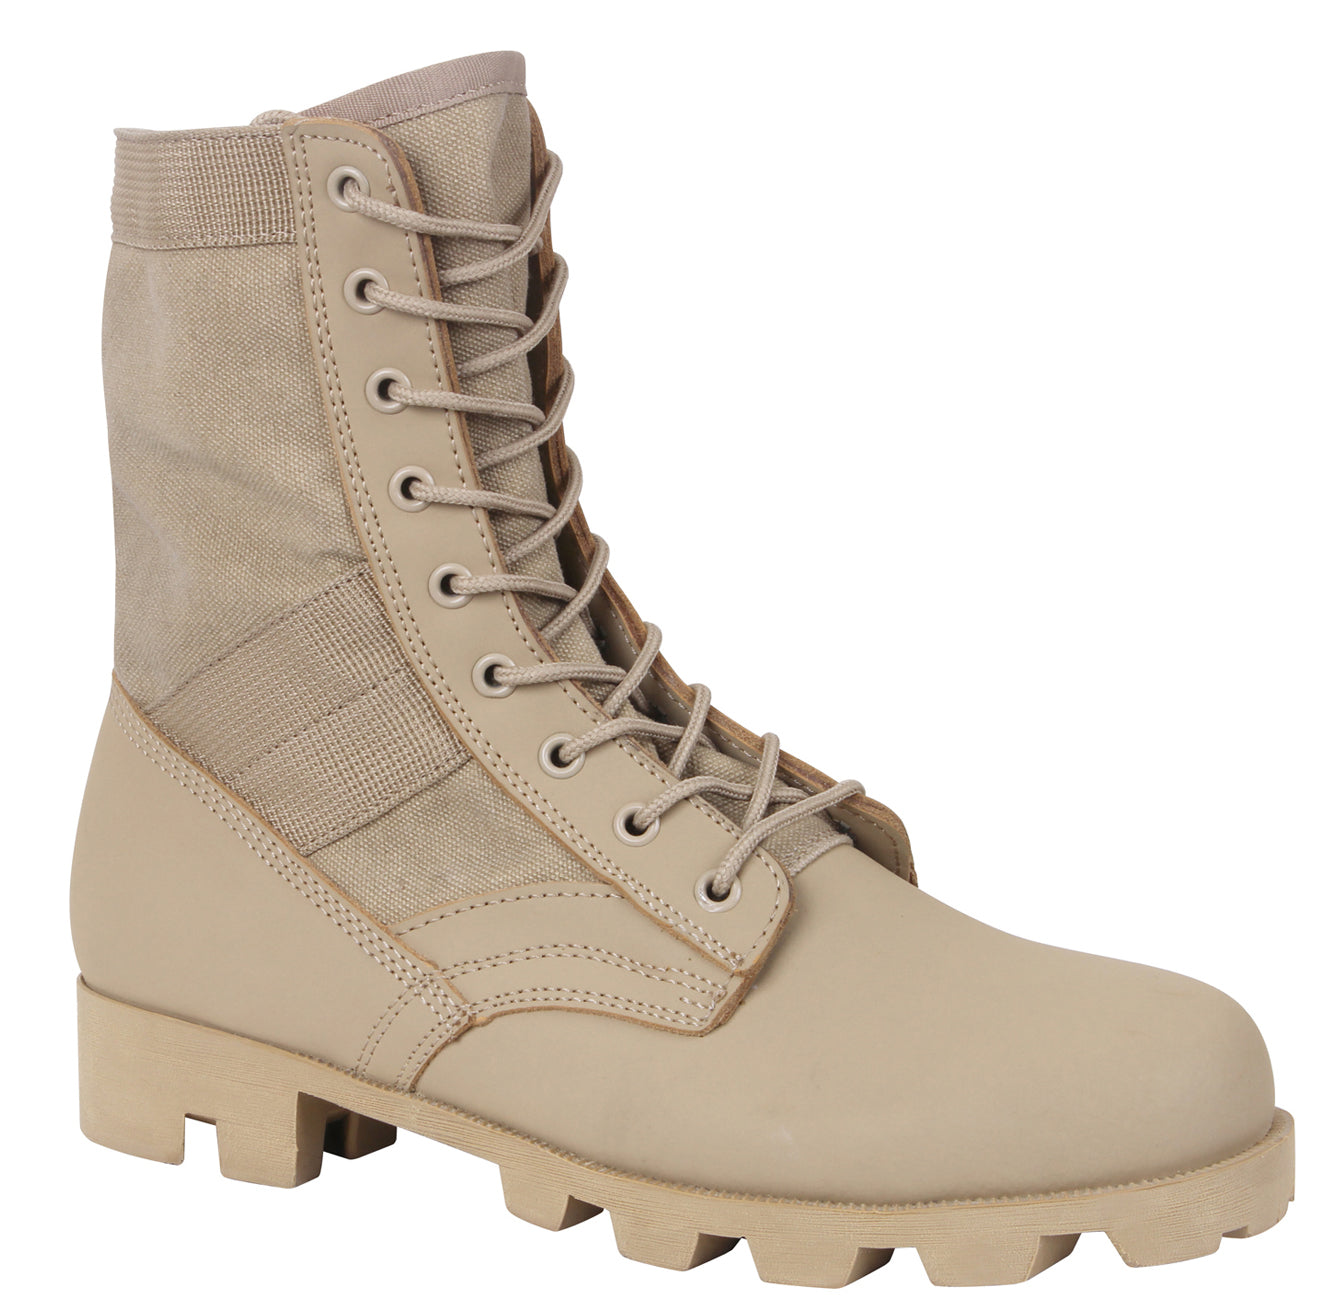 Rothco Jungle Boots Military Style Boot - 8 Inch